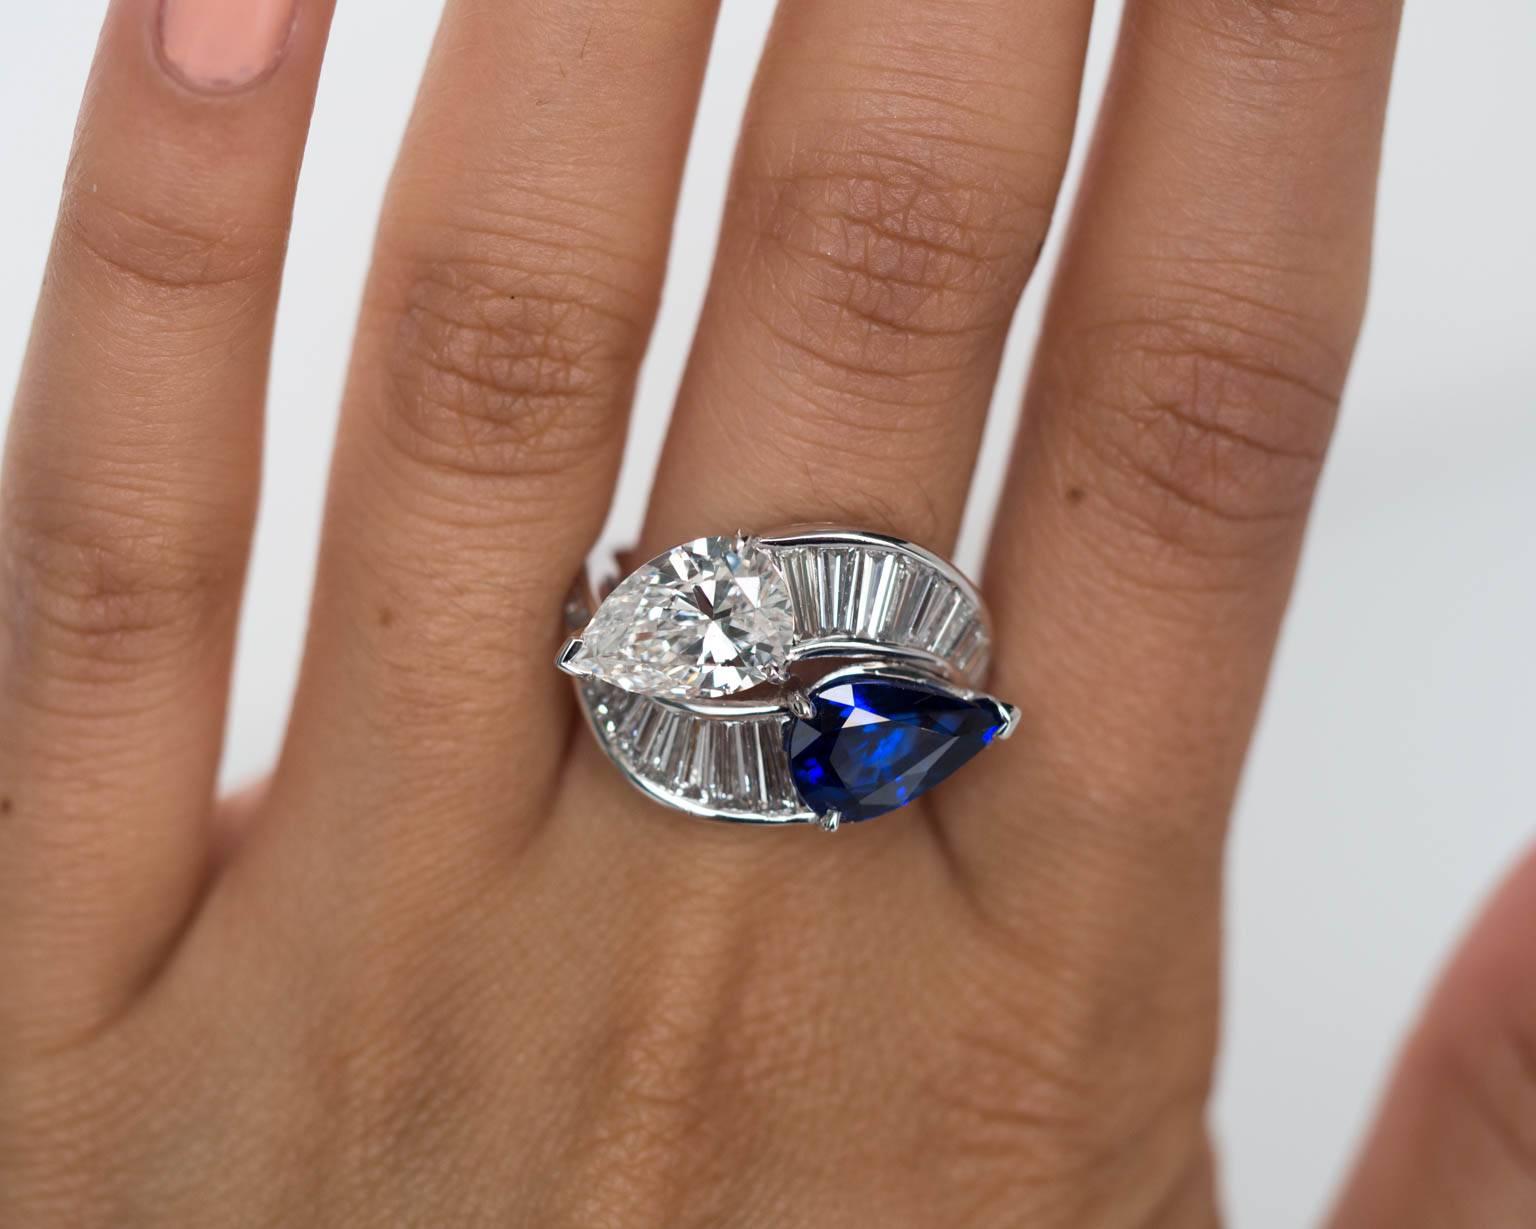 A true work of art. This cross-over ring features a GIA certified 2.15ct pear shape diamond at F-SI1 clarity as well as a 3.01ct royal blue sapphire with 
This piece is handcrafted in platinum, and there is metal engraving work around the entire